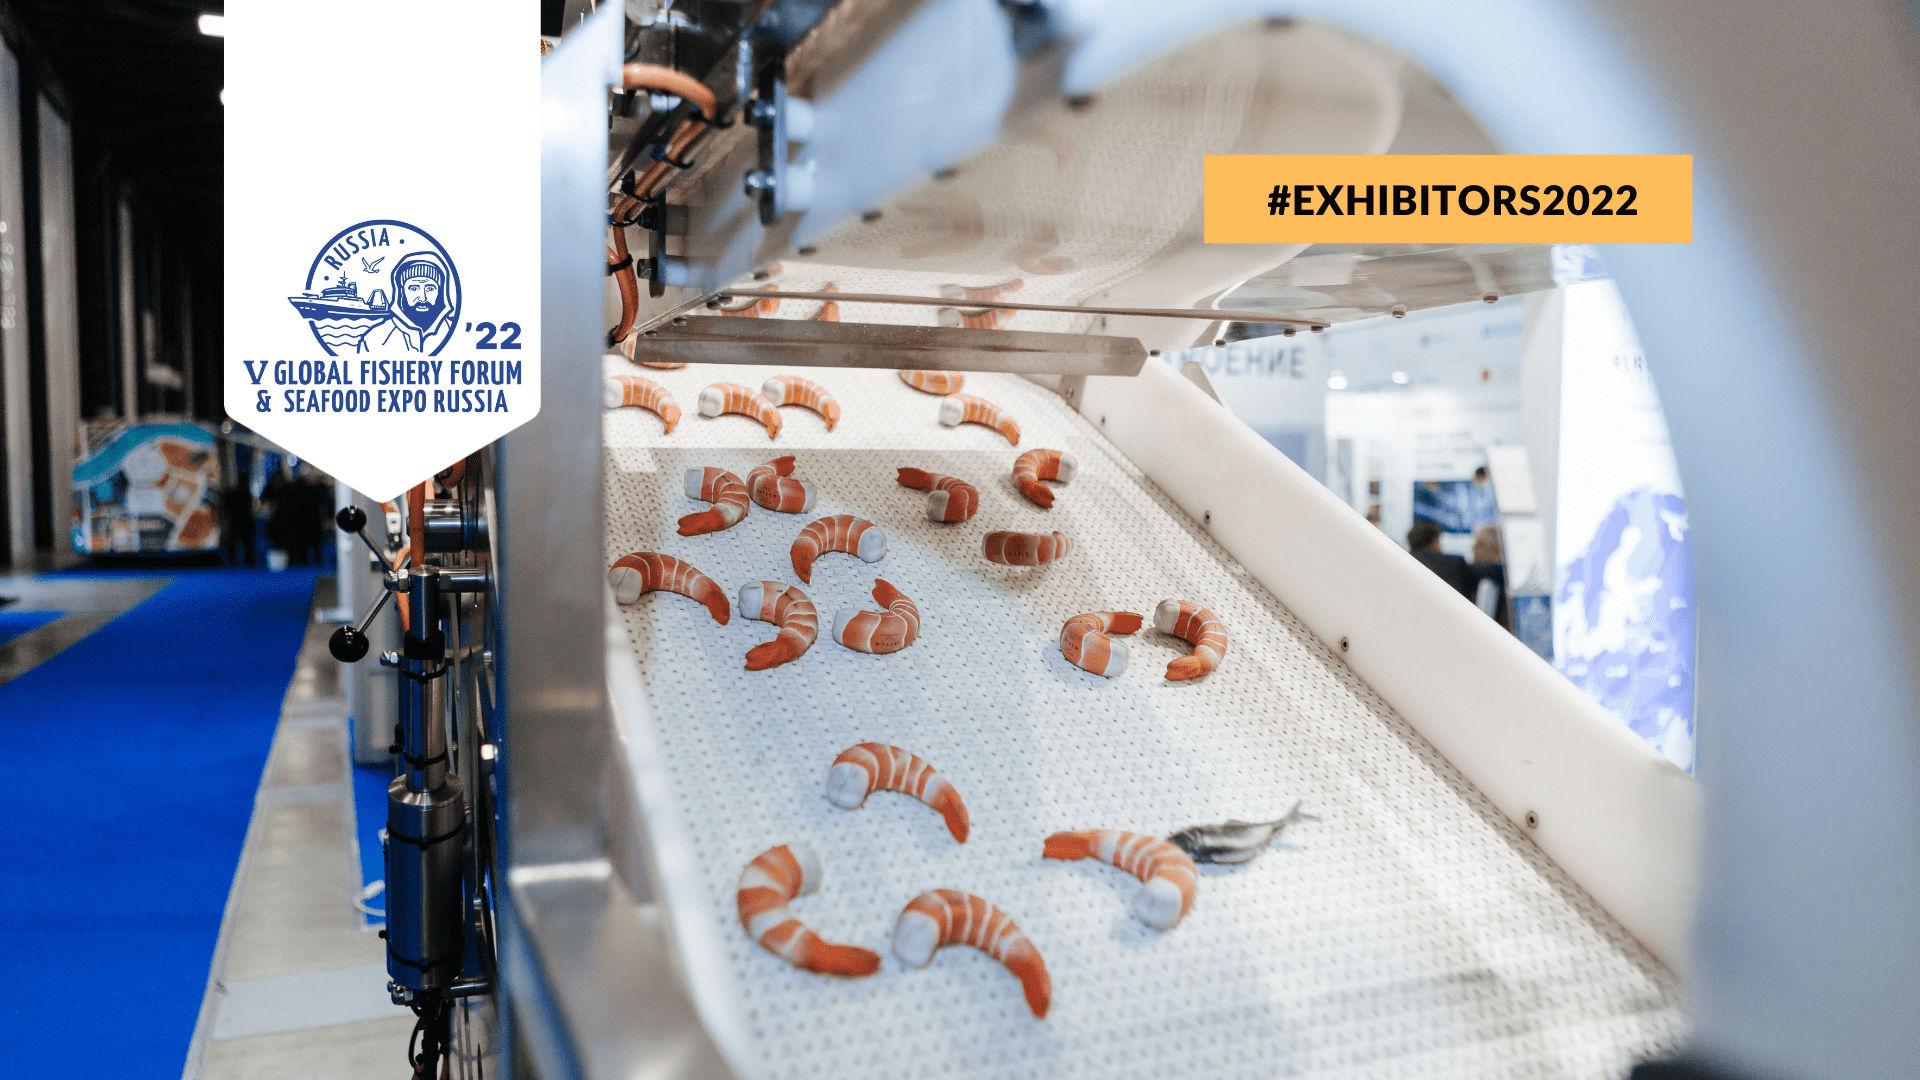 Seafood Expo Russia 2022: Overview of New Exhibitors No. 9